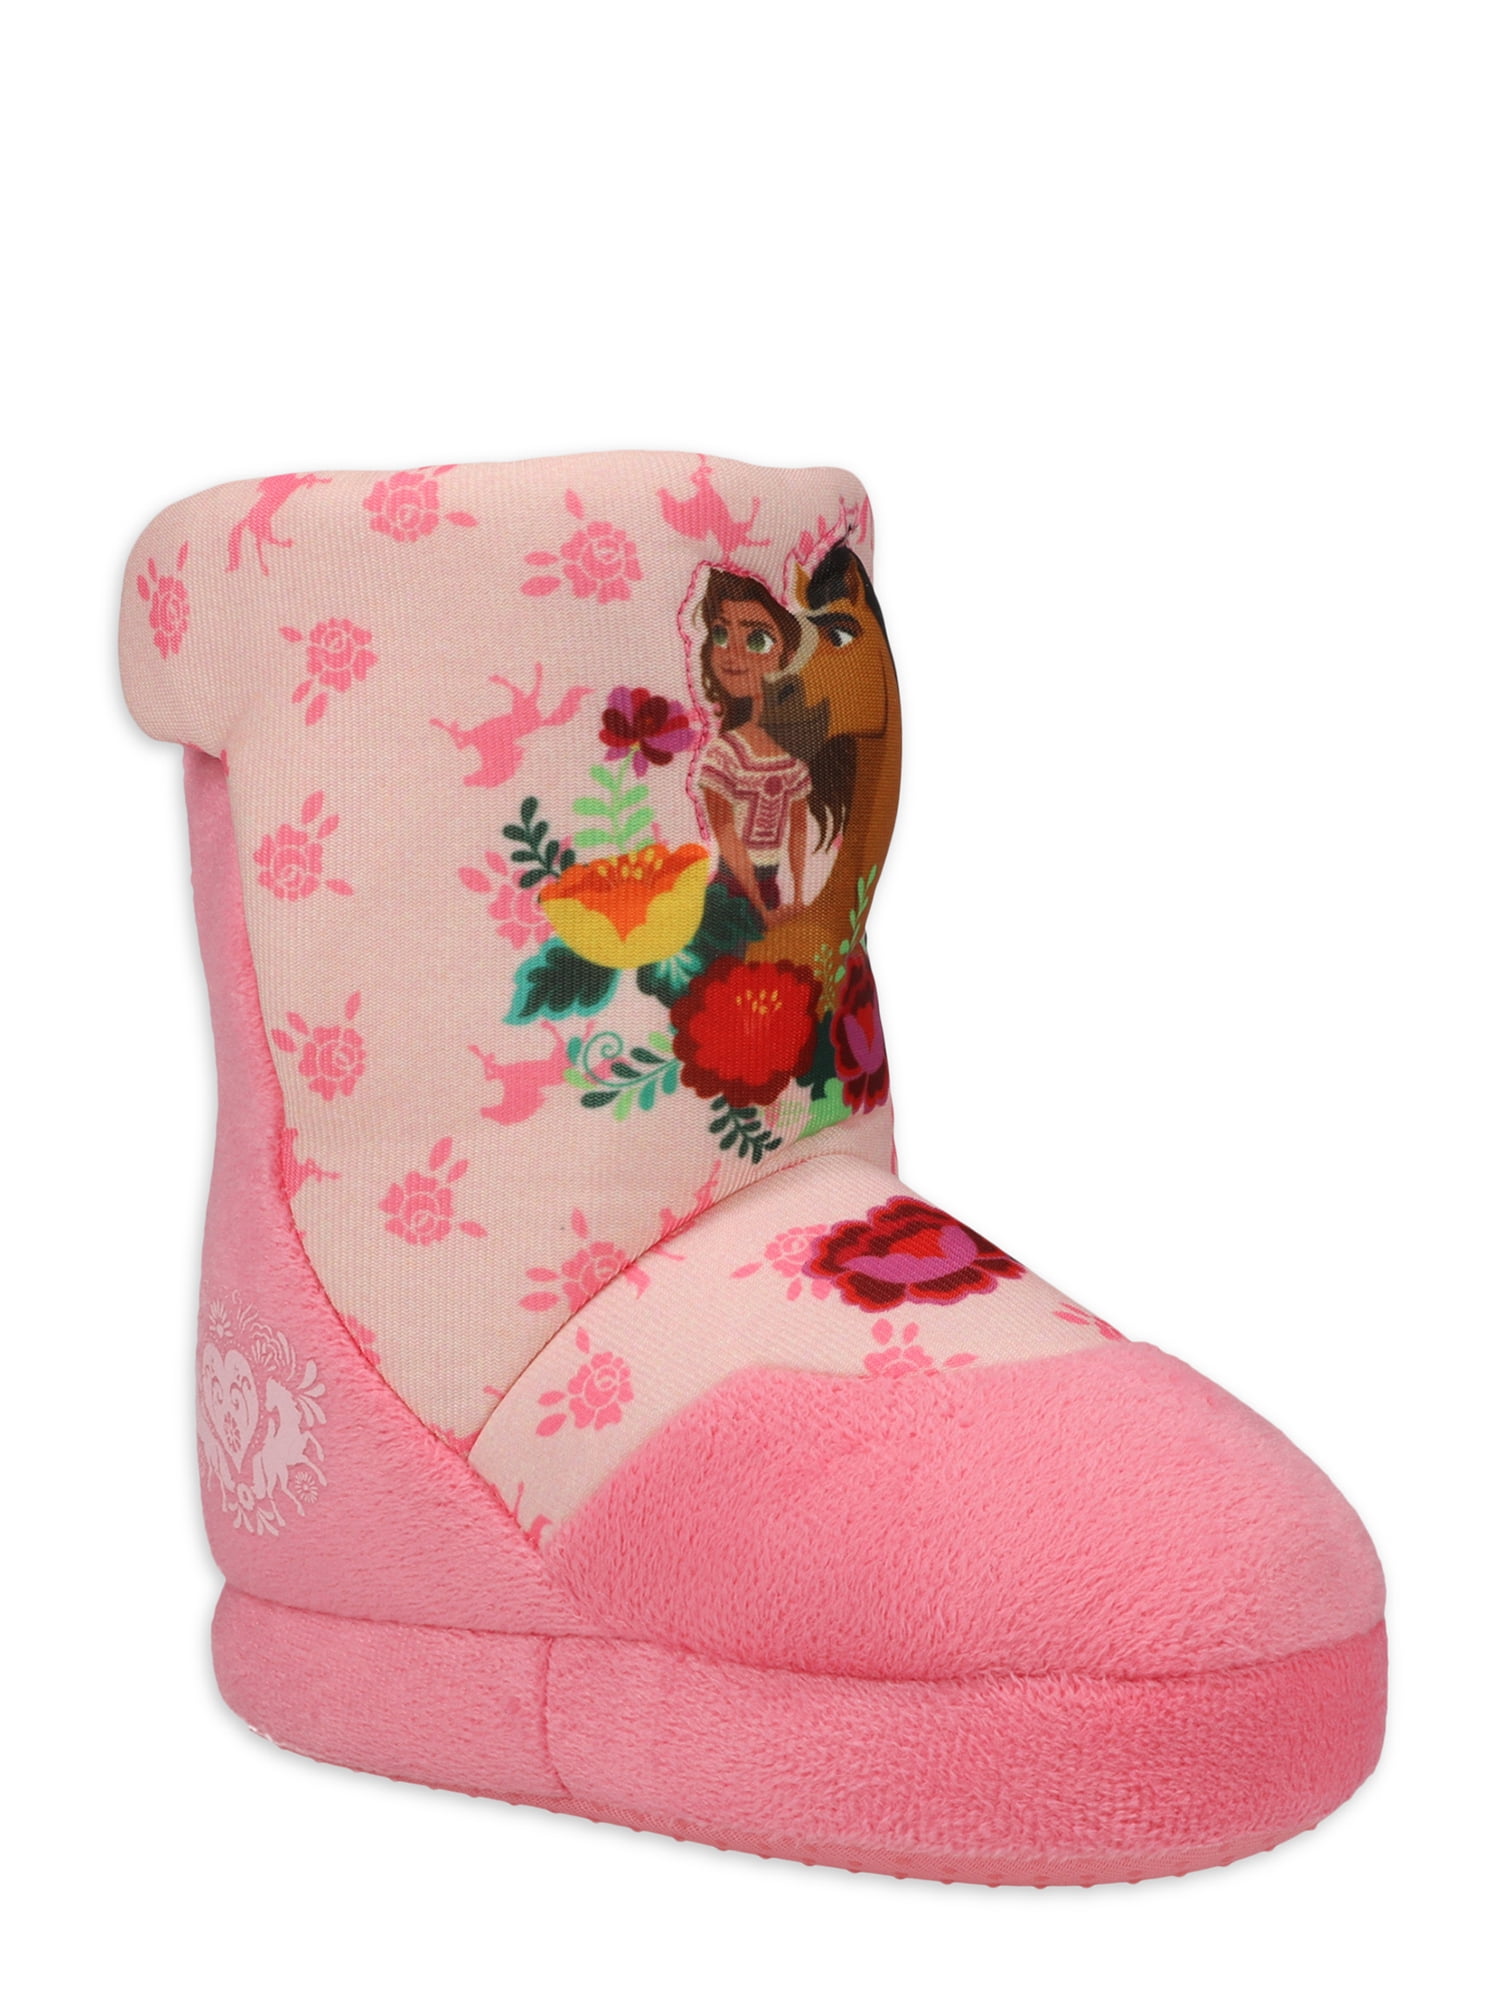 ~ New With Tags MSRP $30.00 SO Puffer Bootie Slippers ~  Size Large 9-10 